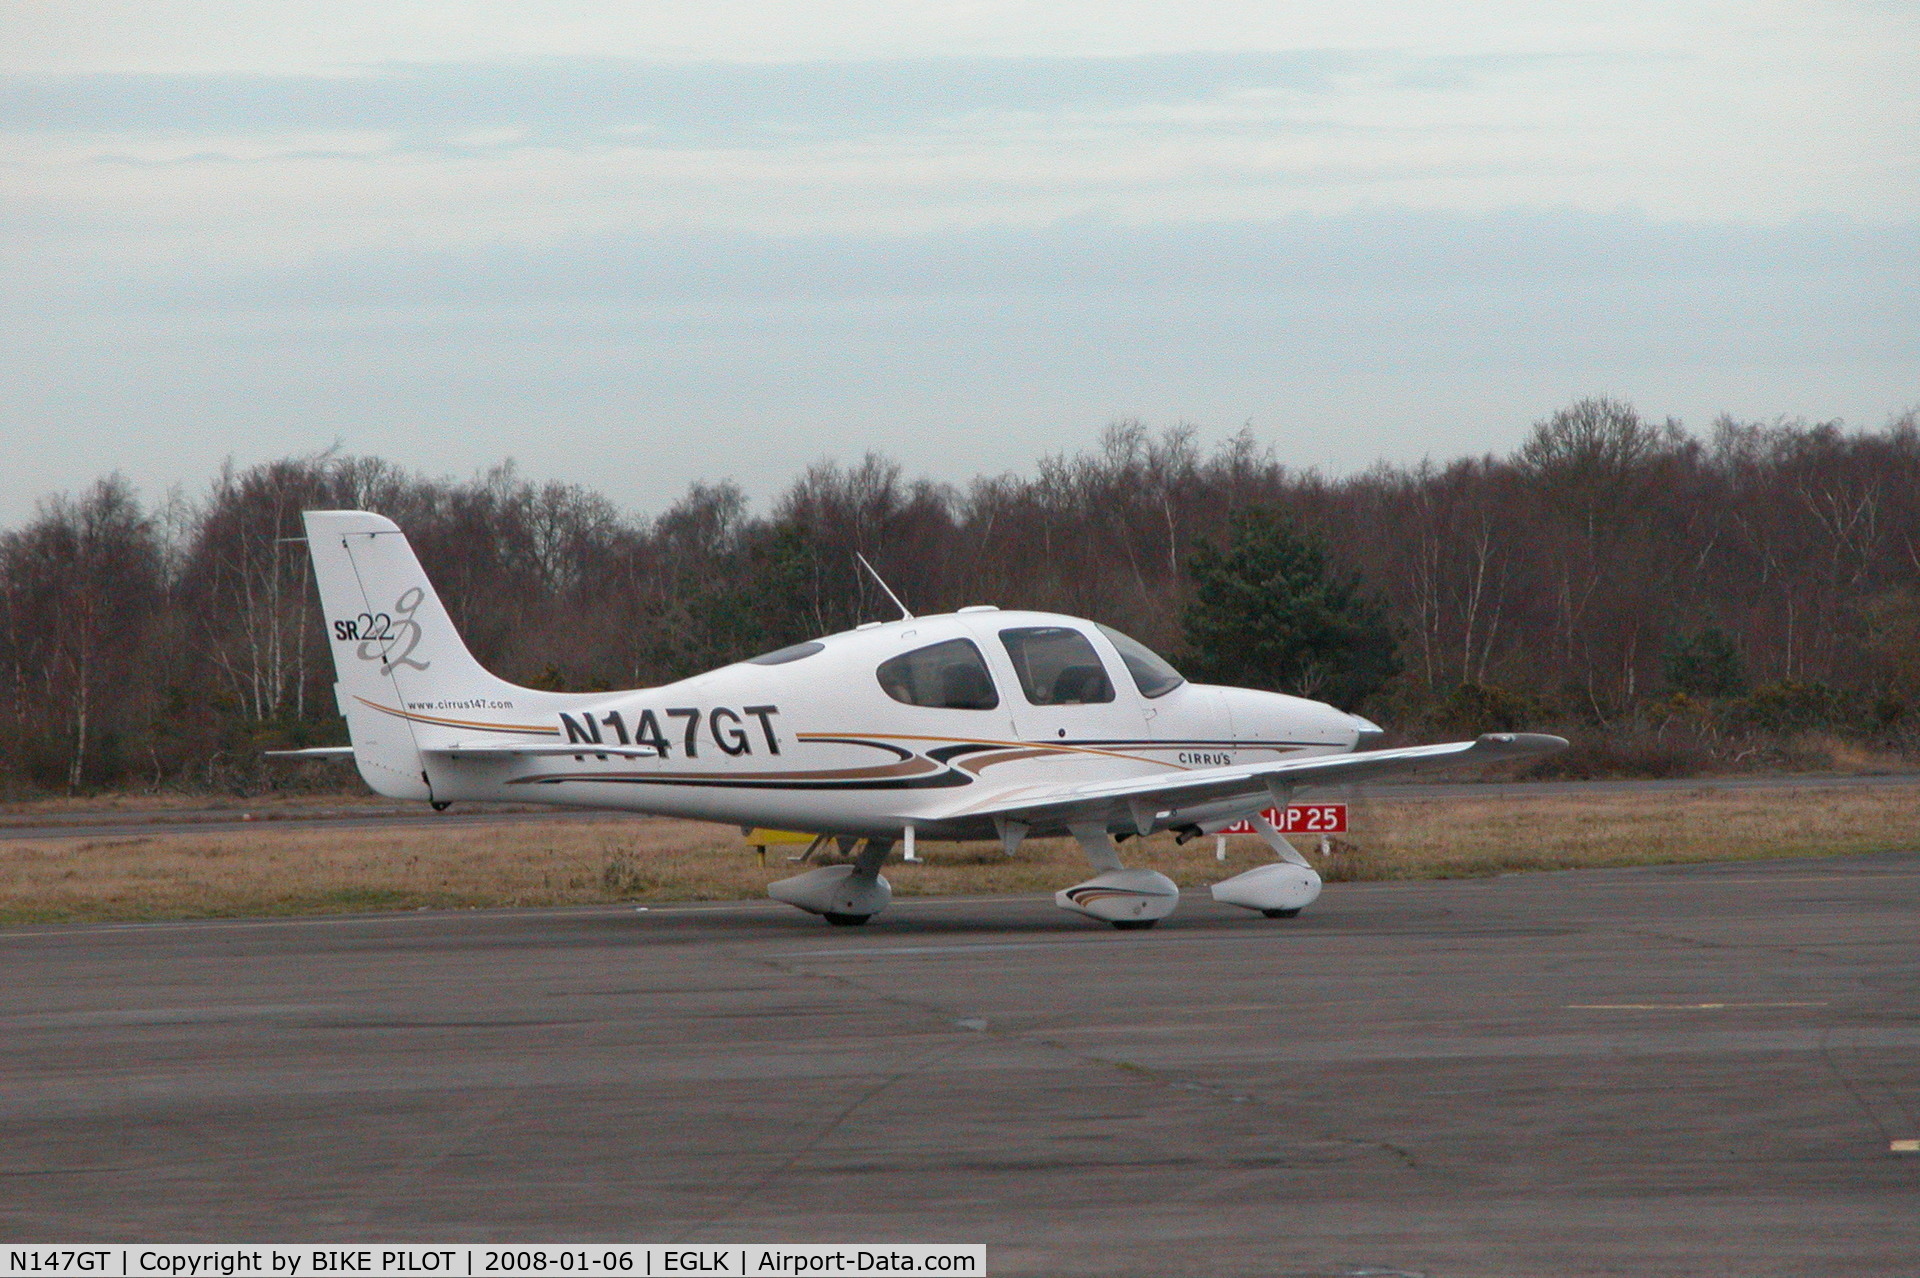 N147GT, 2004 Cirrus SR22 G2 C/N 1069, ONE OF THE MANY CIRRUS SEEN THESE DAYS